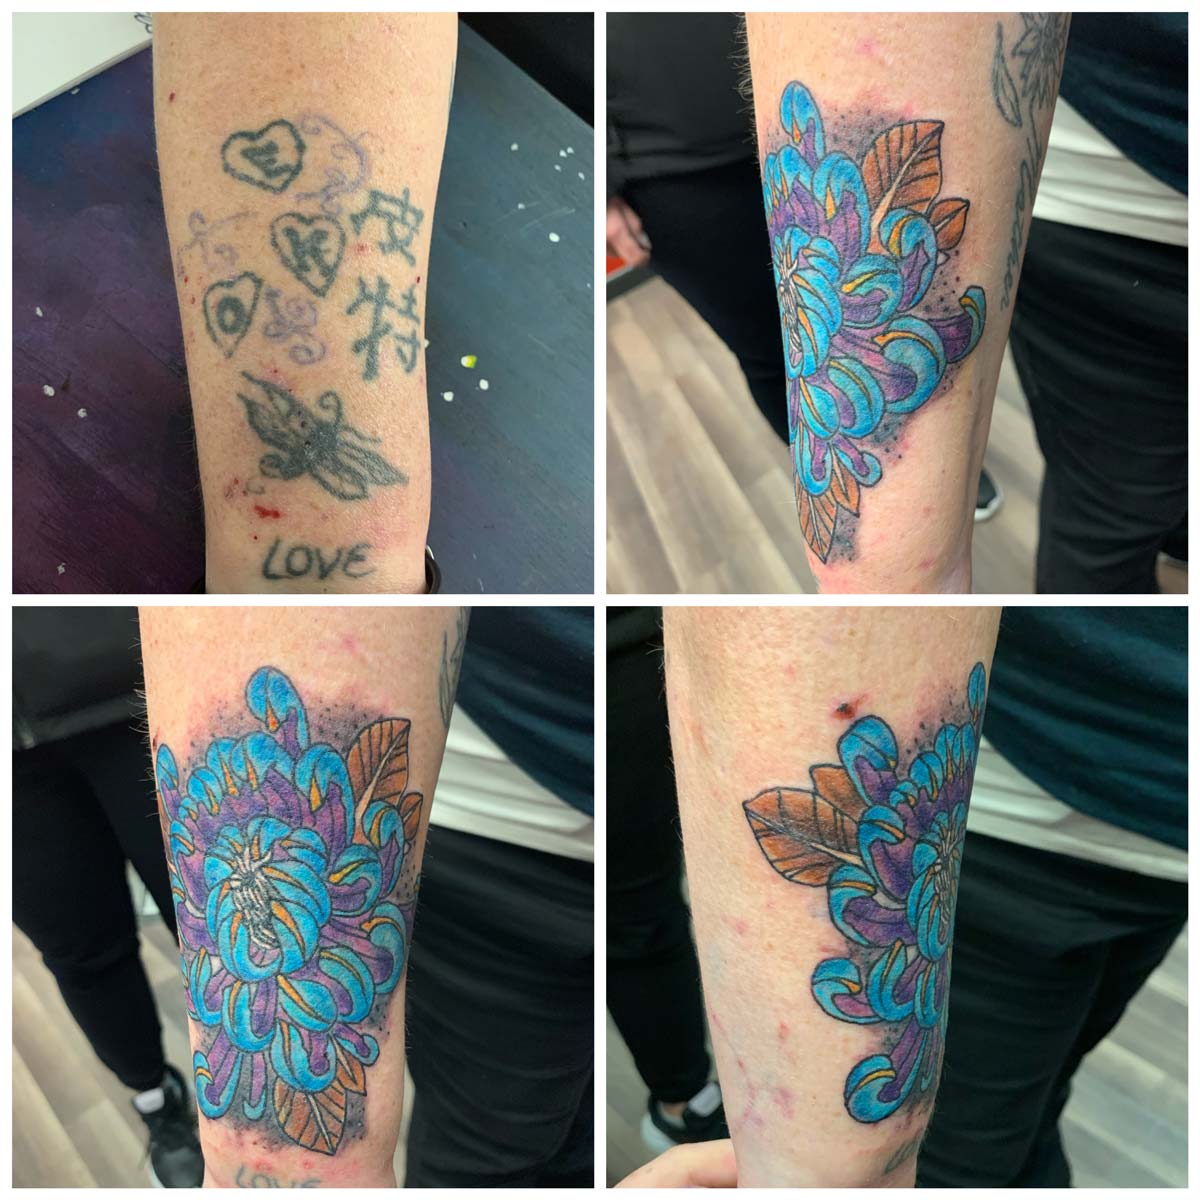 Tattoo Cover Up in Saint Albans, VT